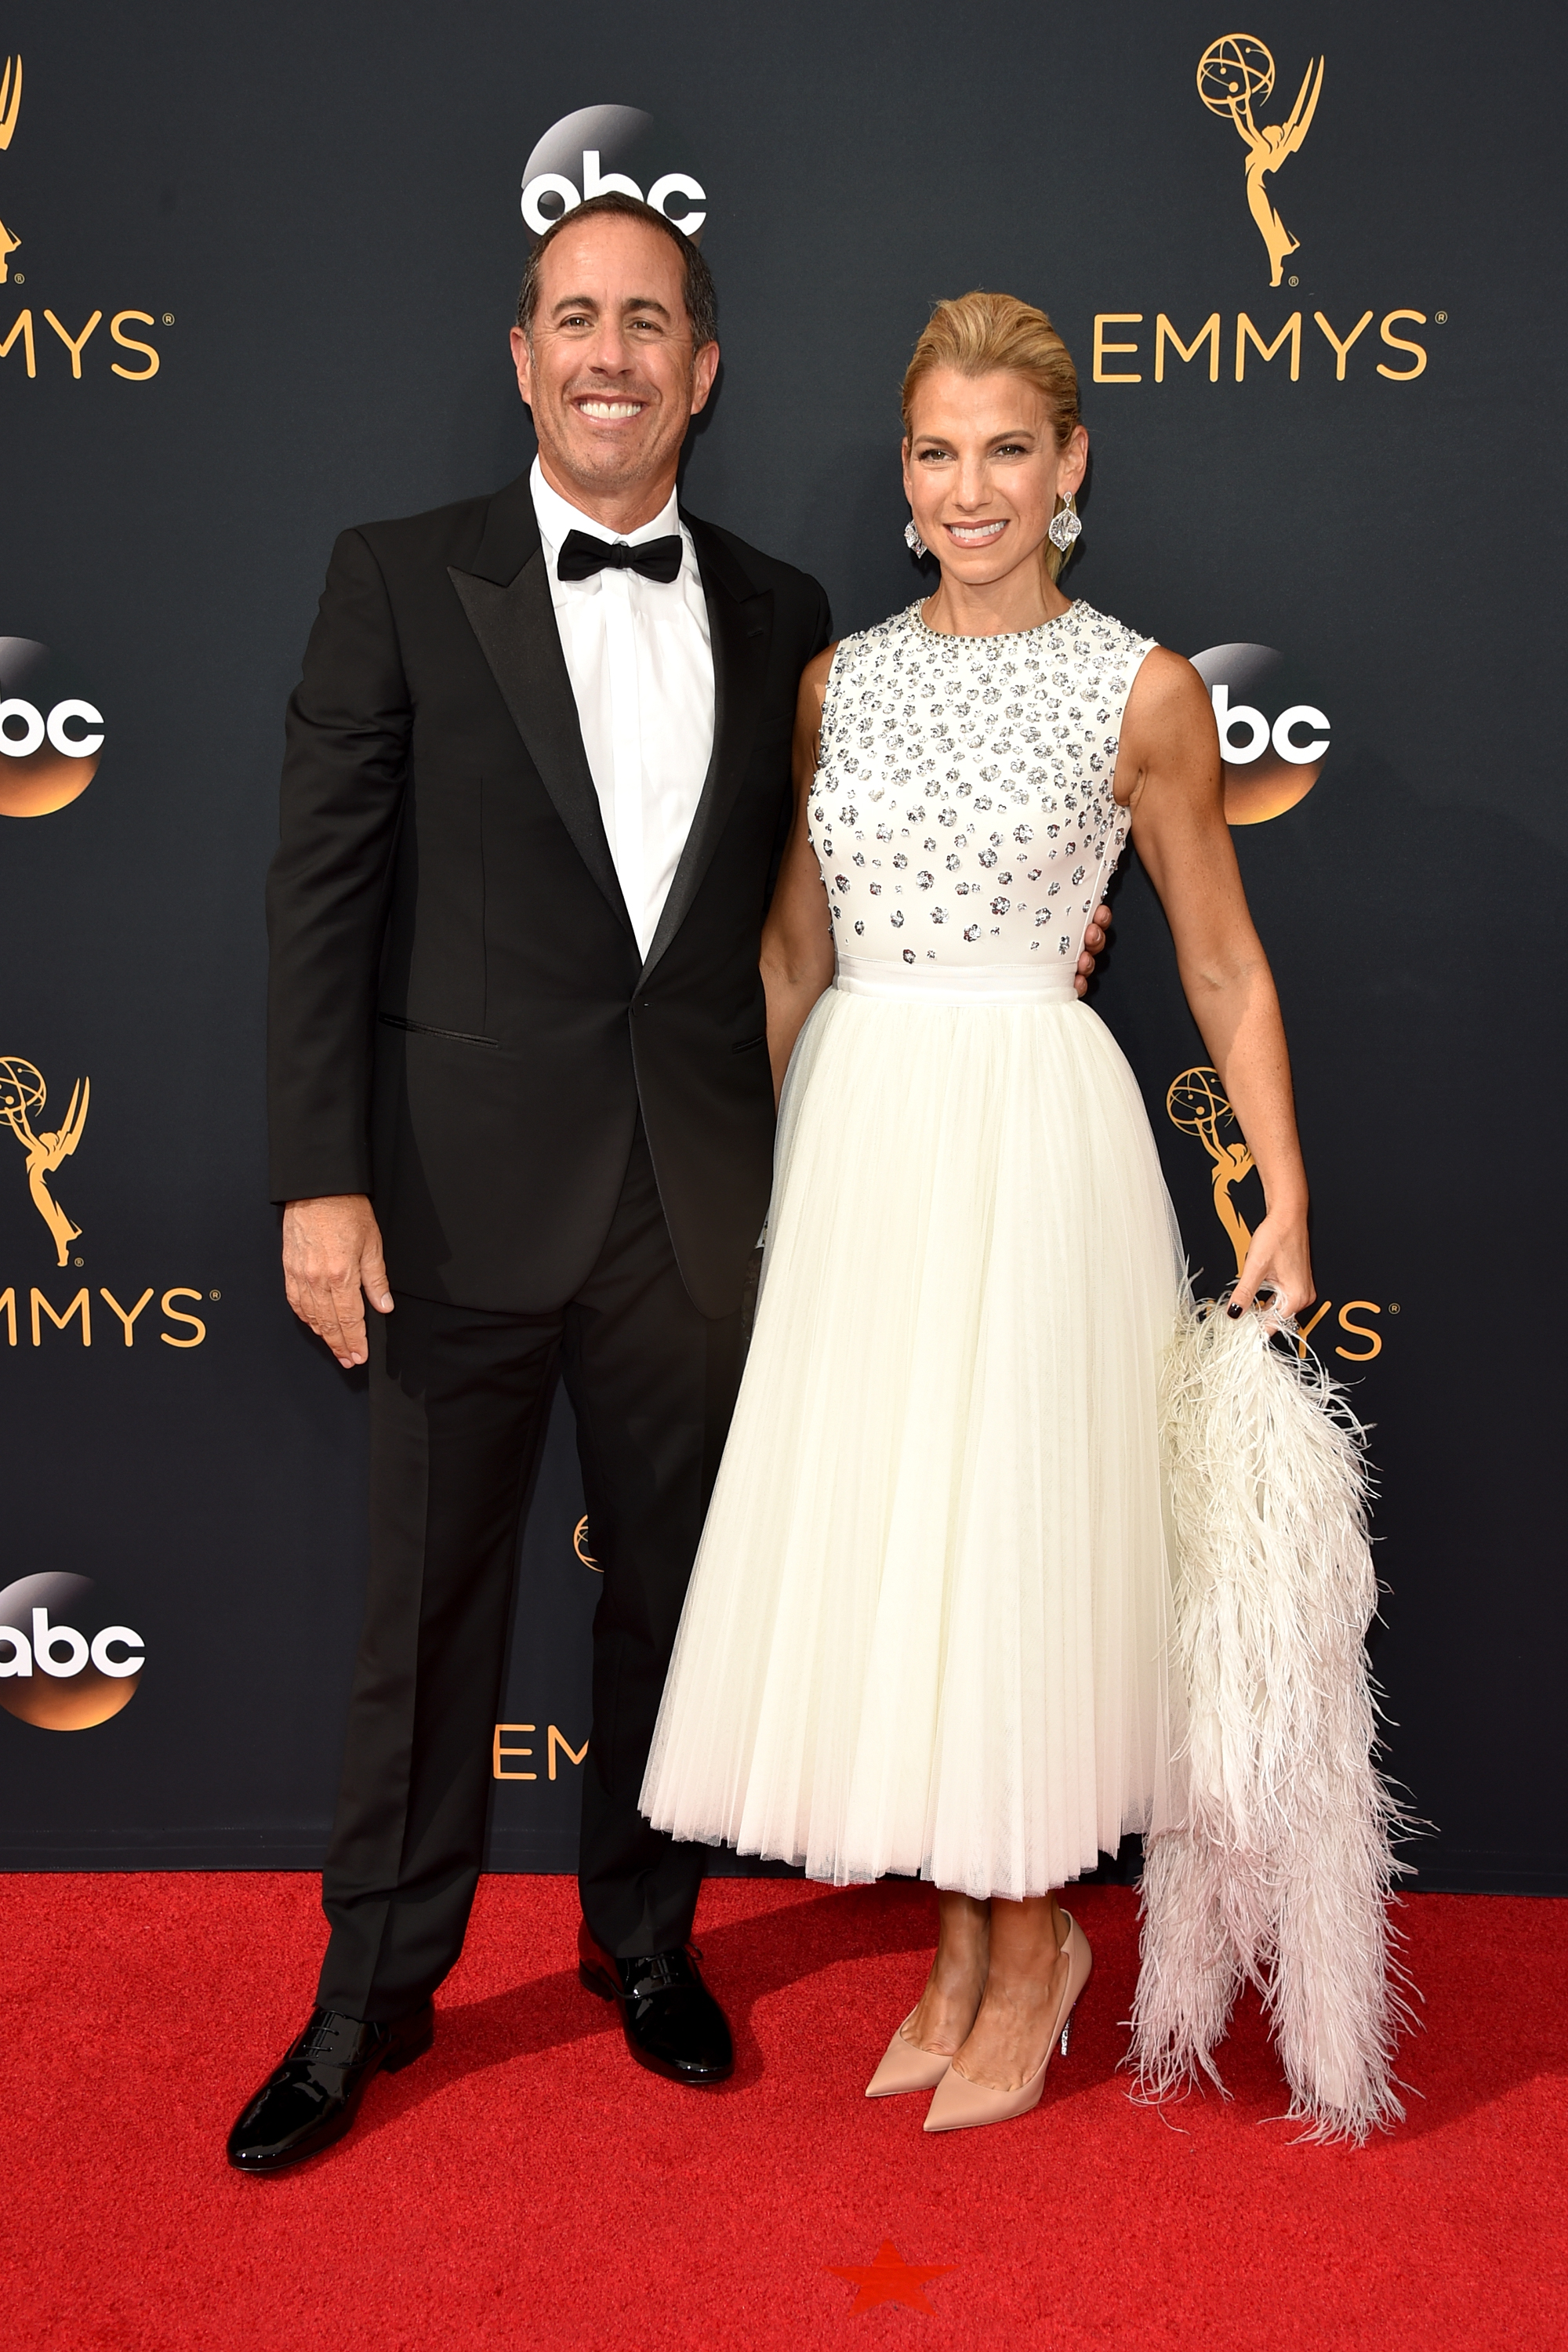 Jerry Seinfeld and Jessica Seinfeld arrive at the 68th Annual Primetime Emmy Awards at Microsoft Theater on September 18, 2016 in Los Angeles.